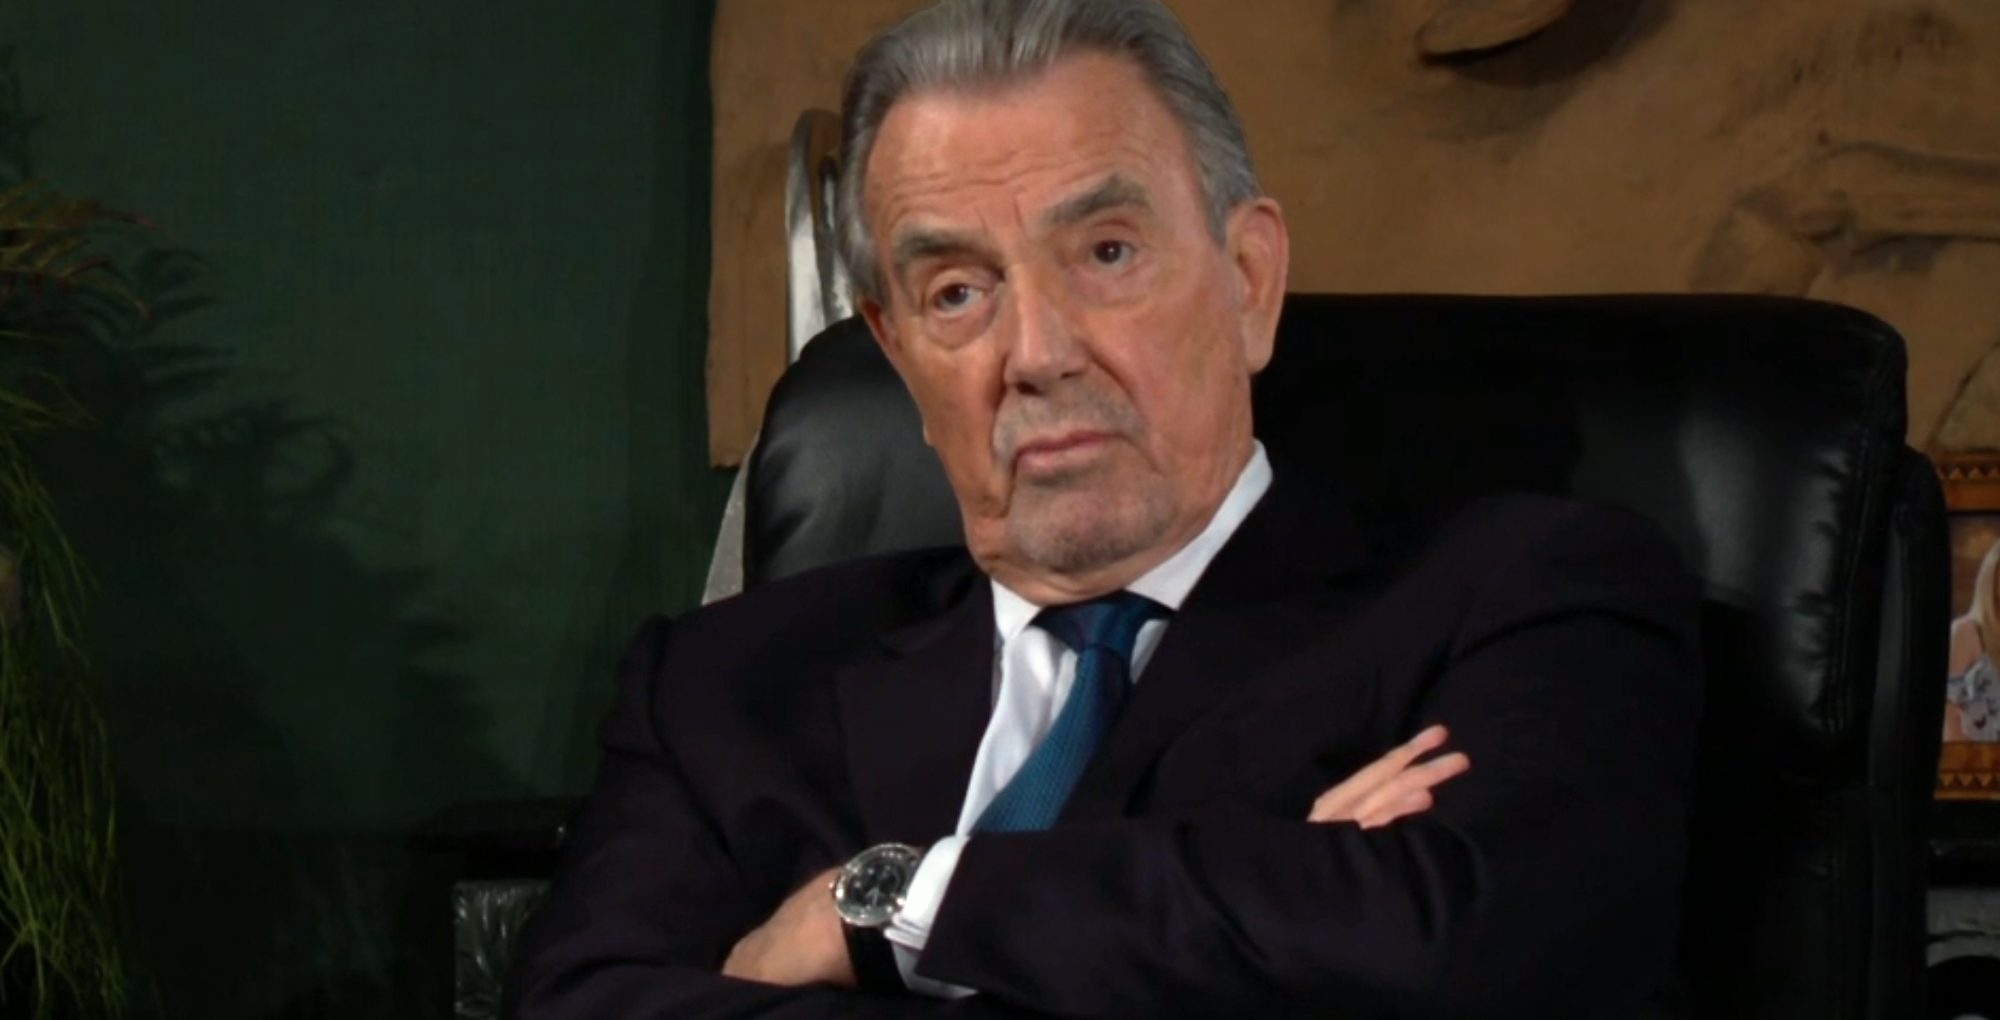 victor newman on the young and the restless.